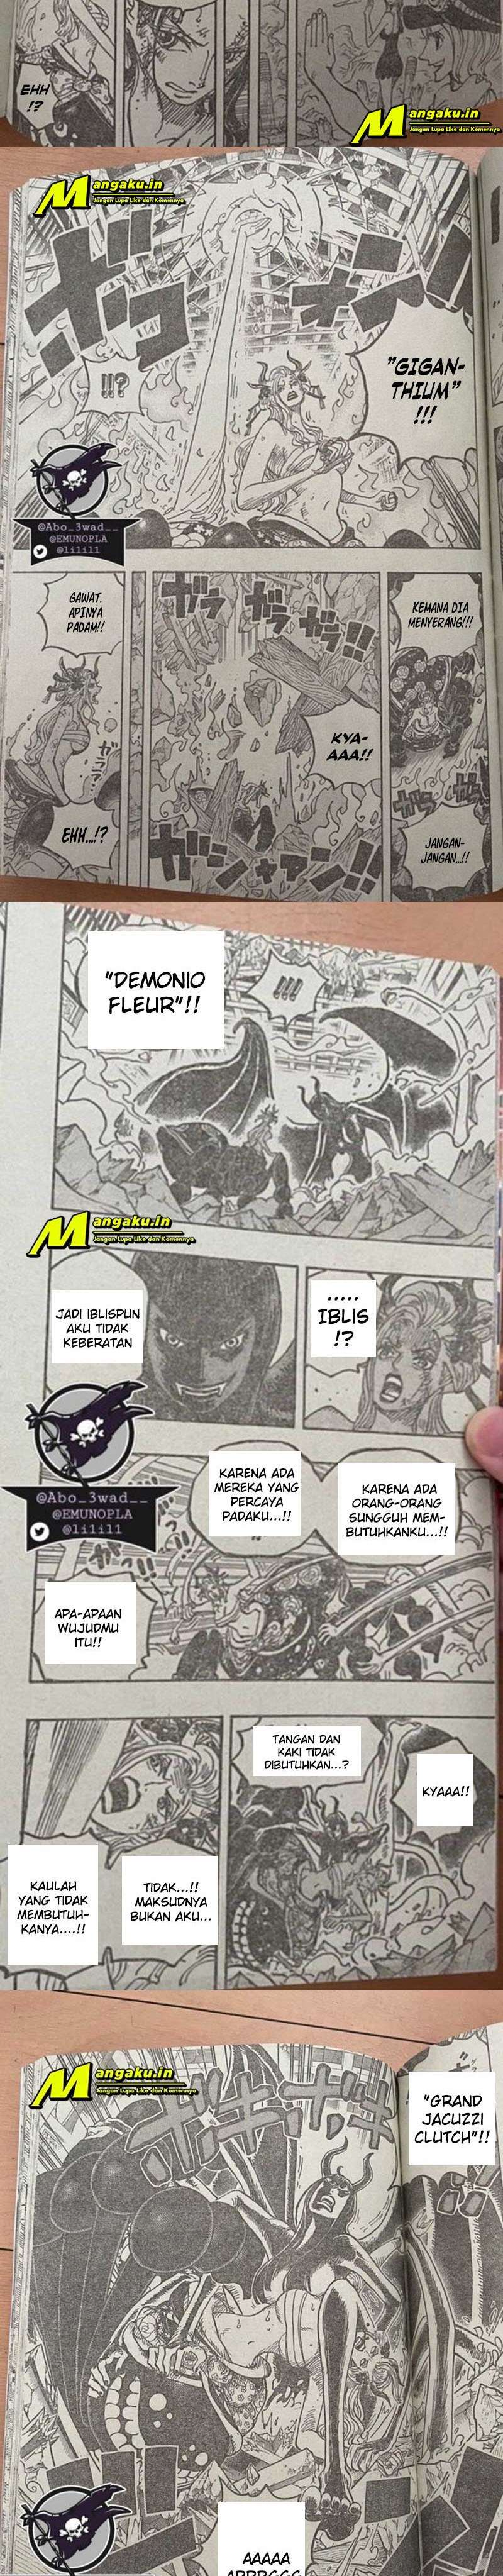 One Piece Chapter 1021 LQ Image 3